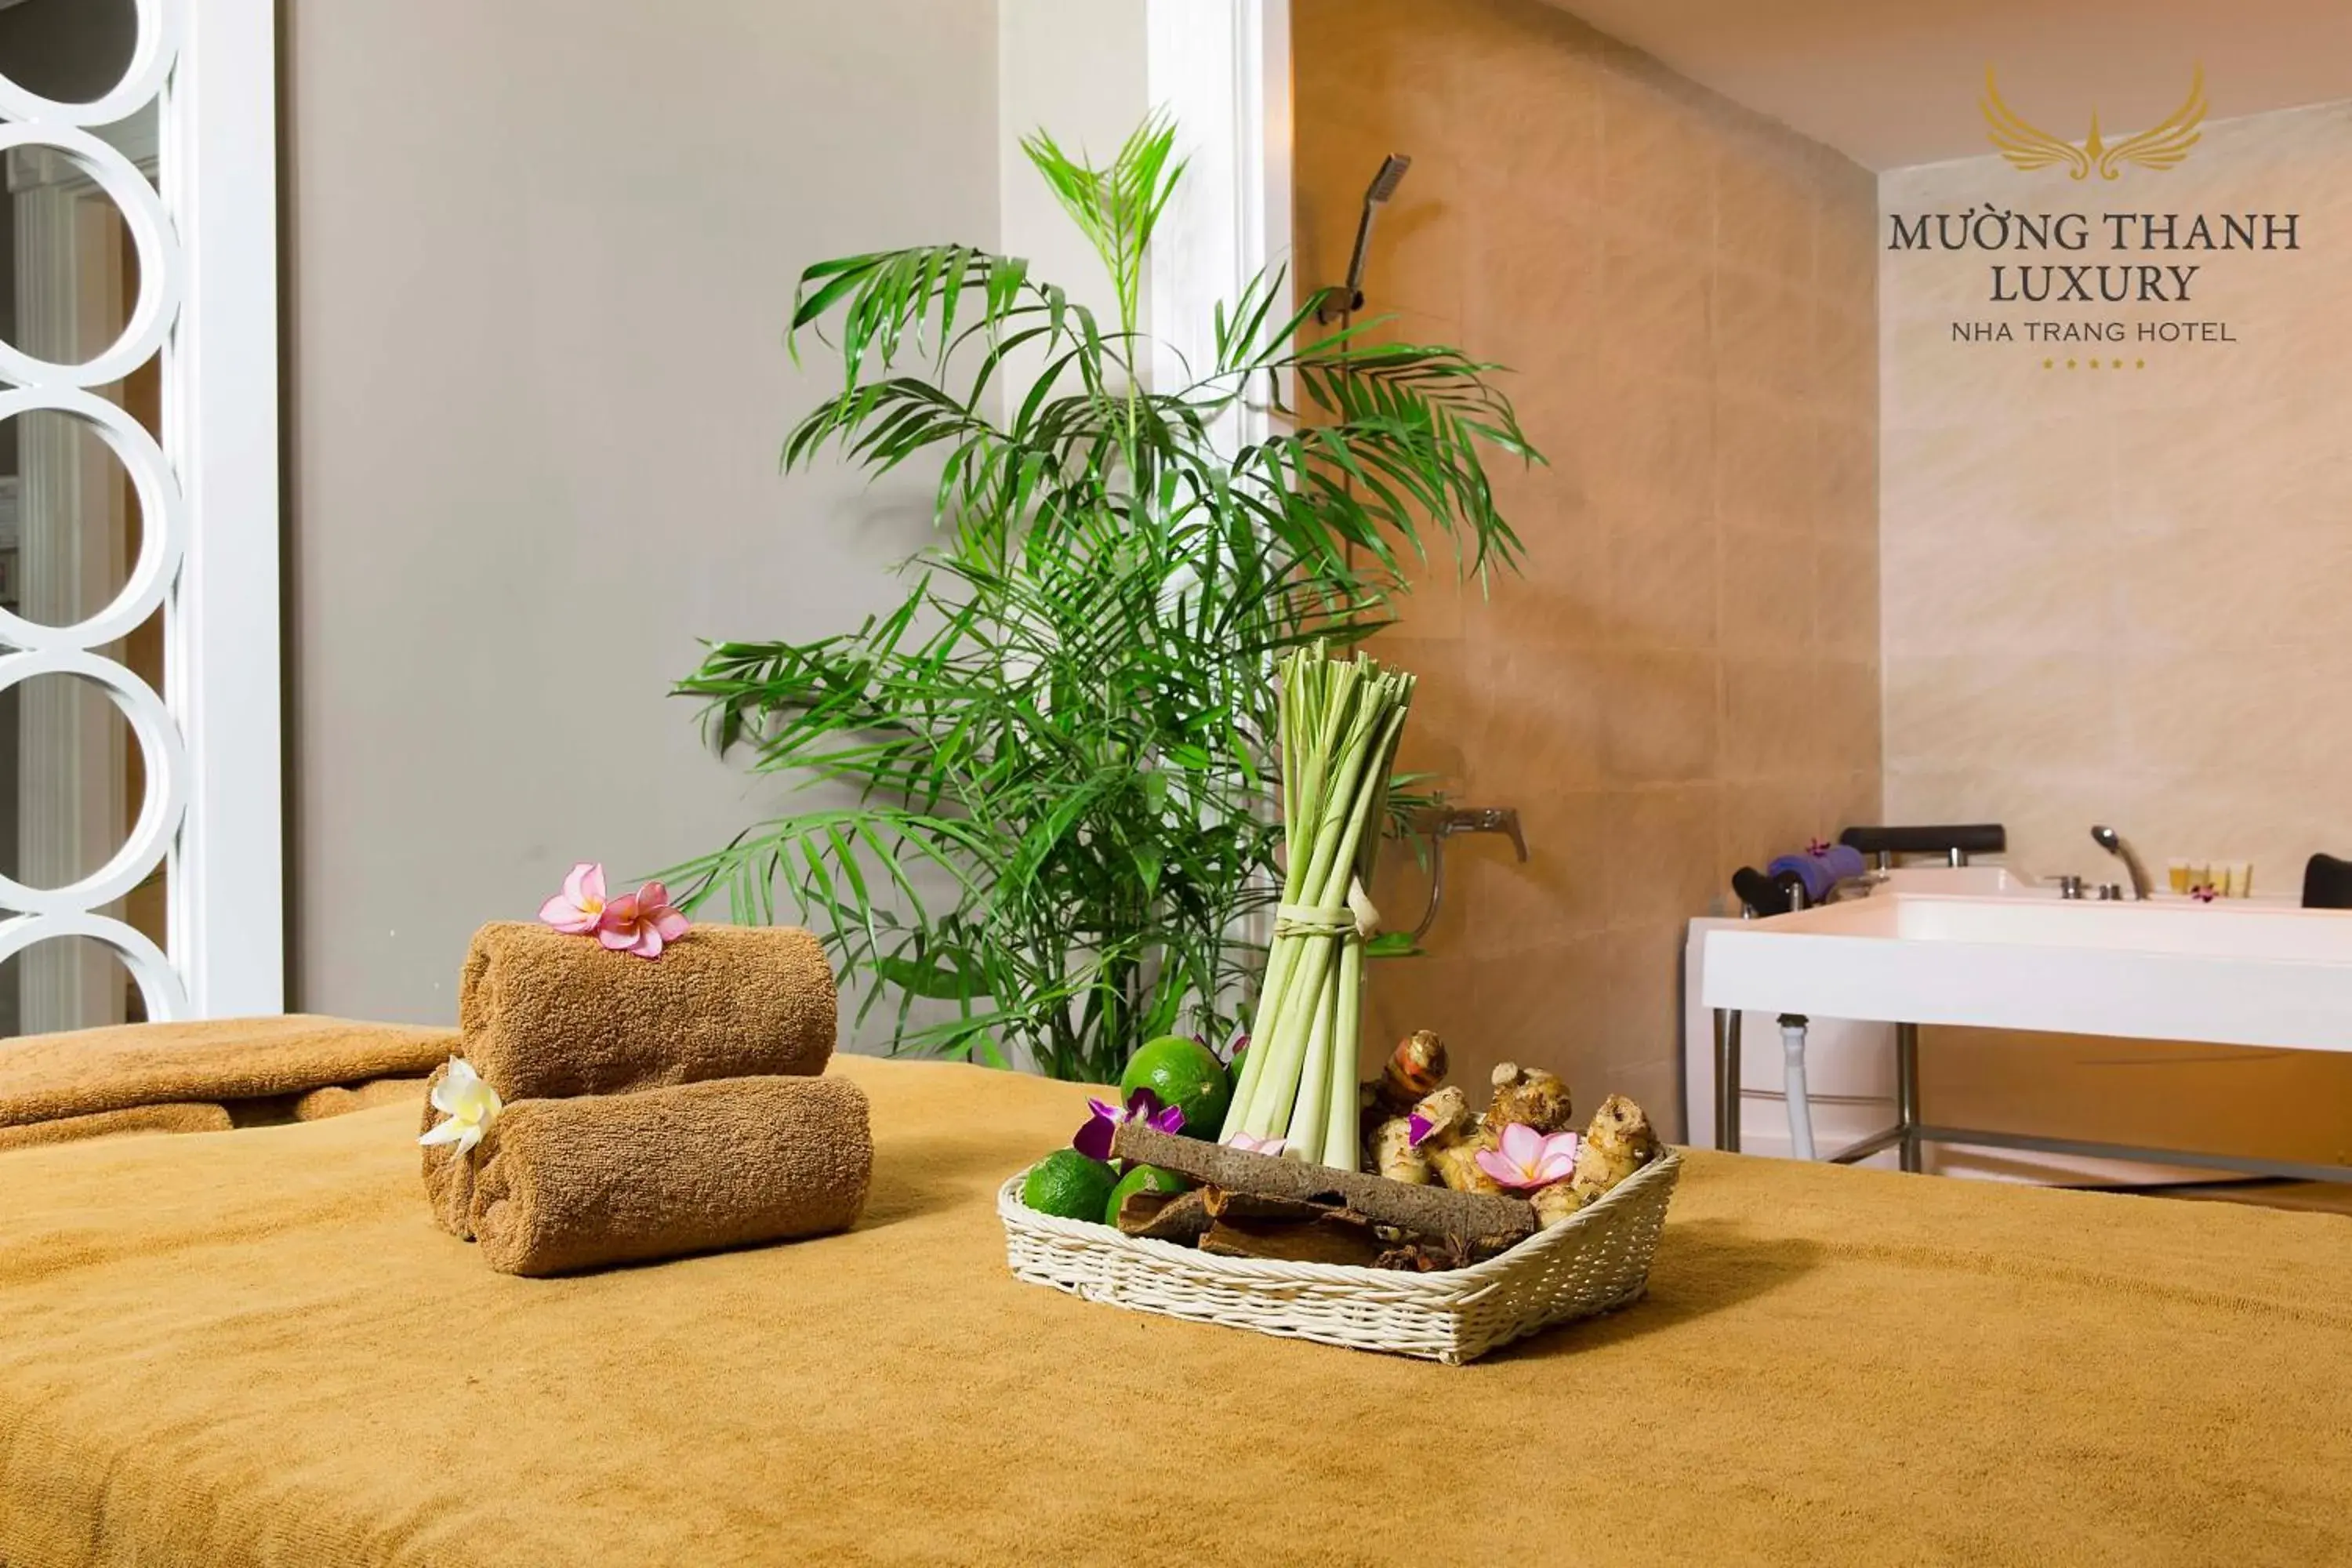 Spa and wellness centre/facilities in Muong Thanh Luxury Nha Trang Hotel